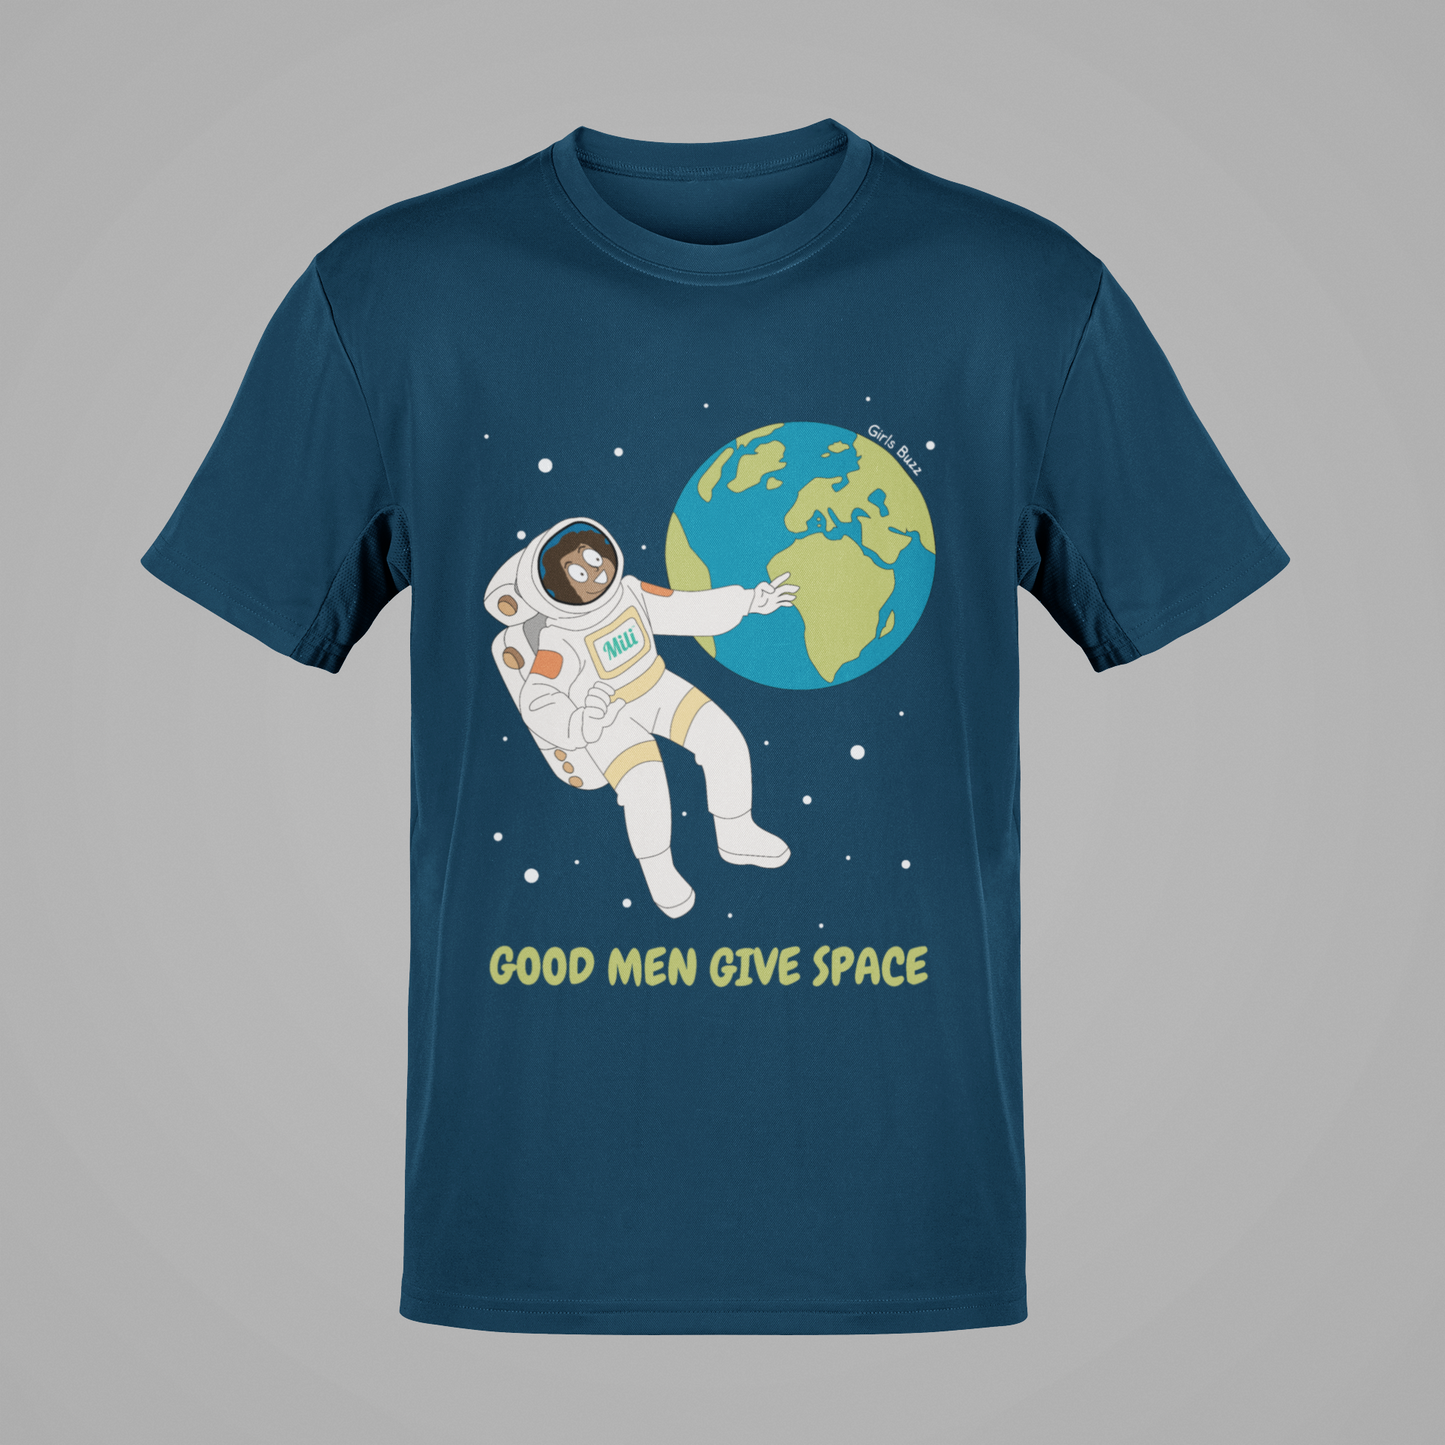 Give Space